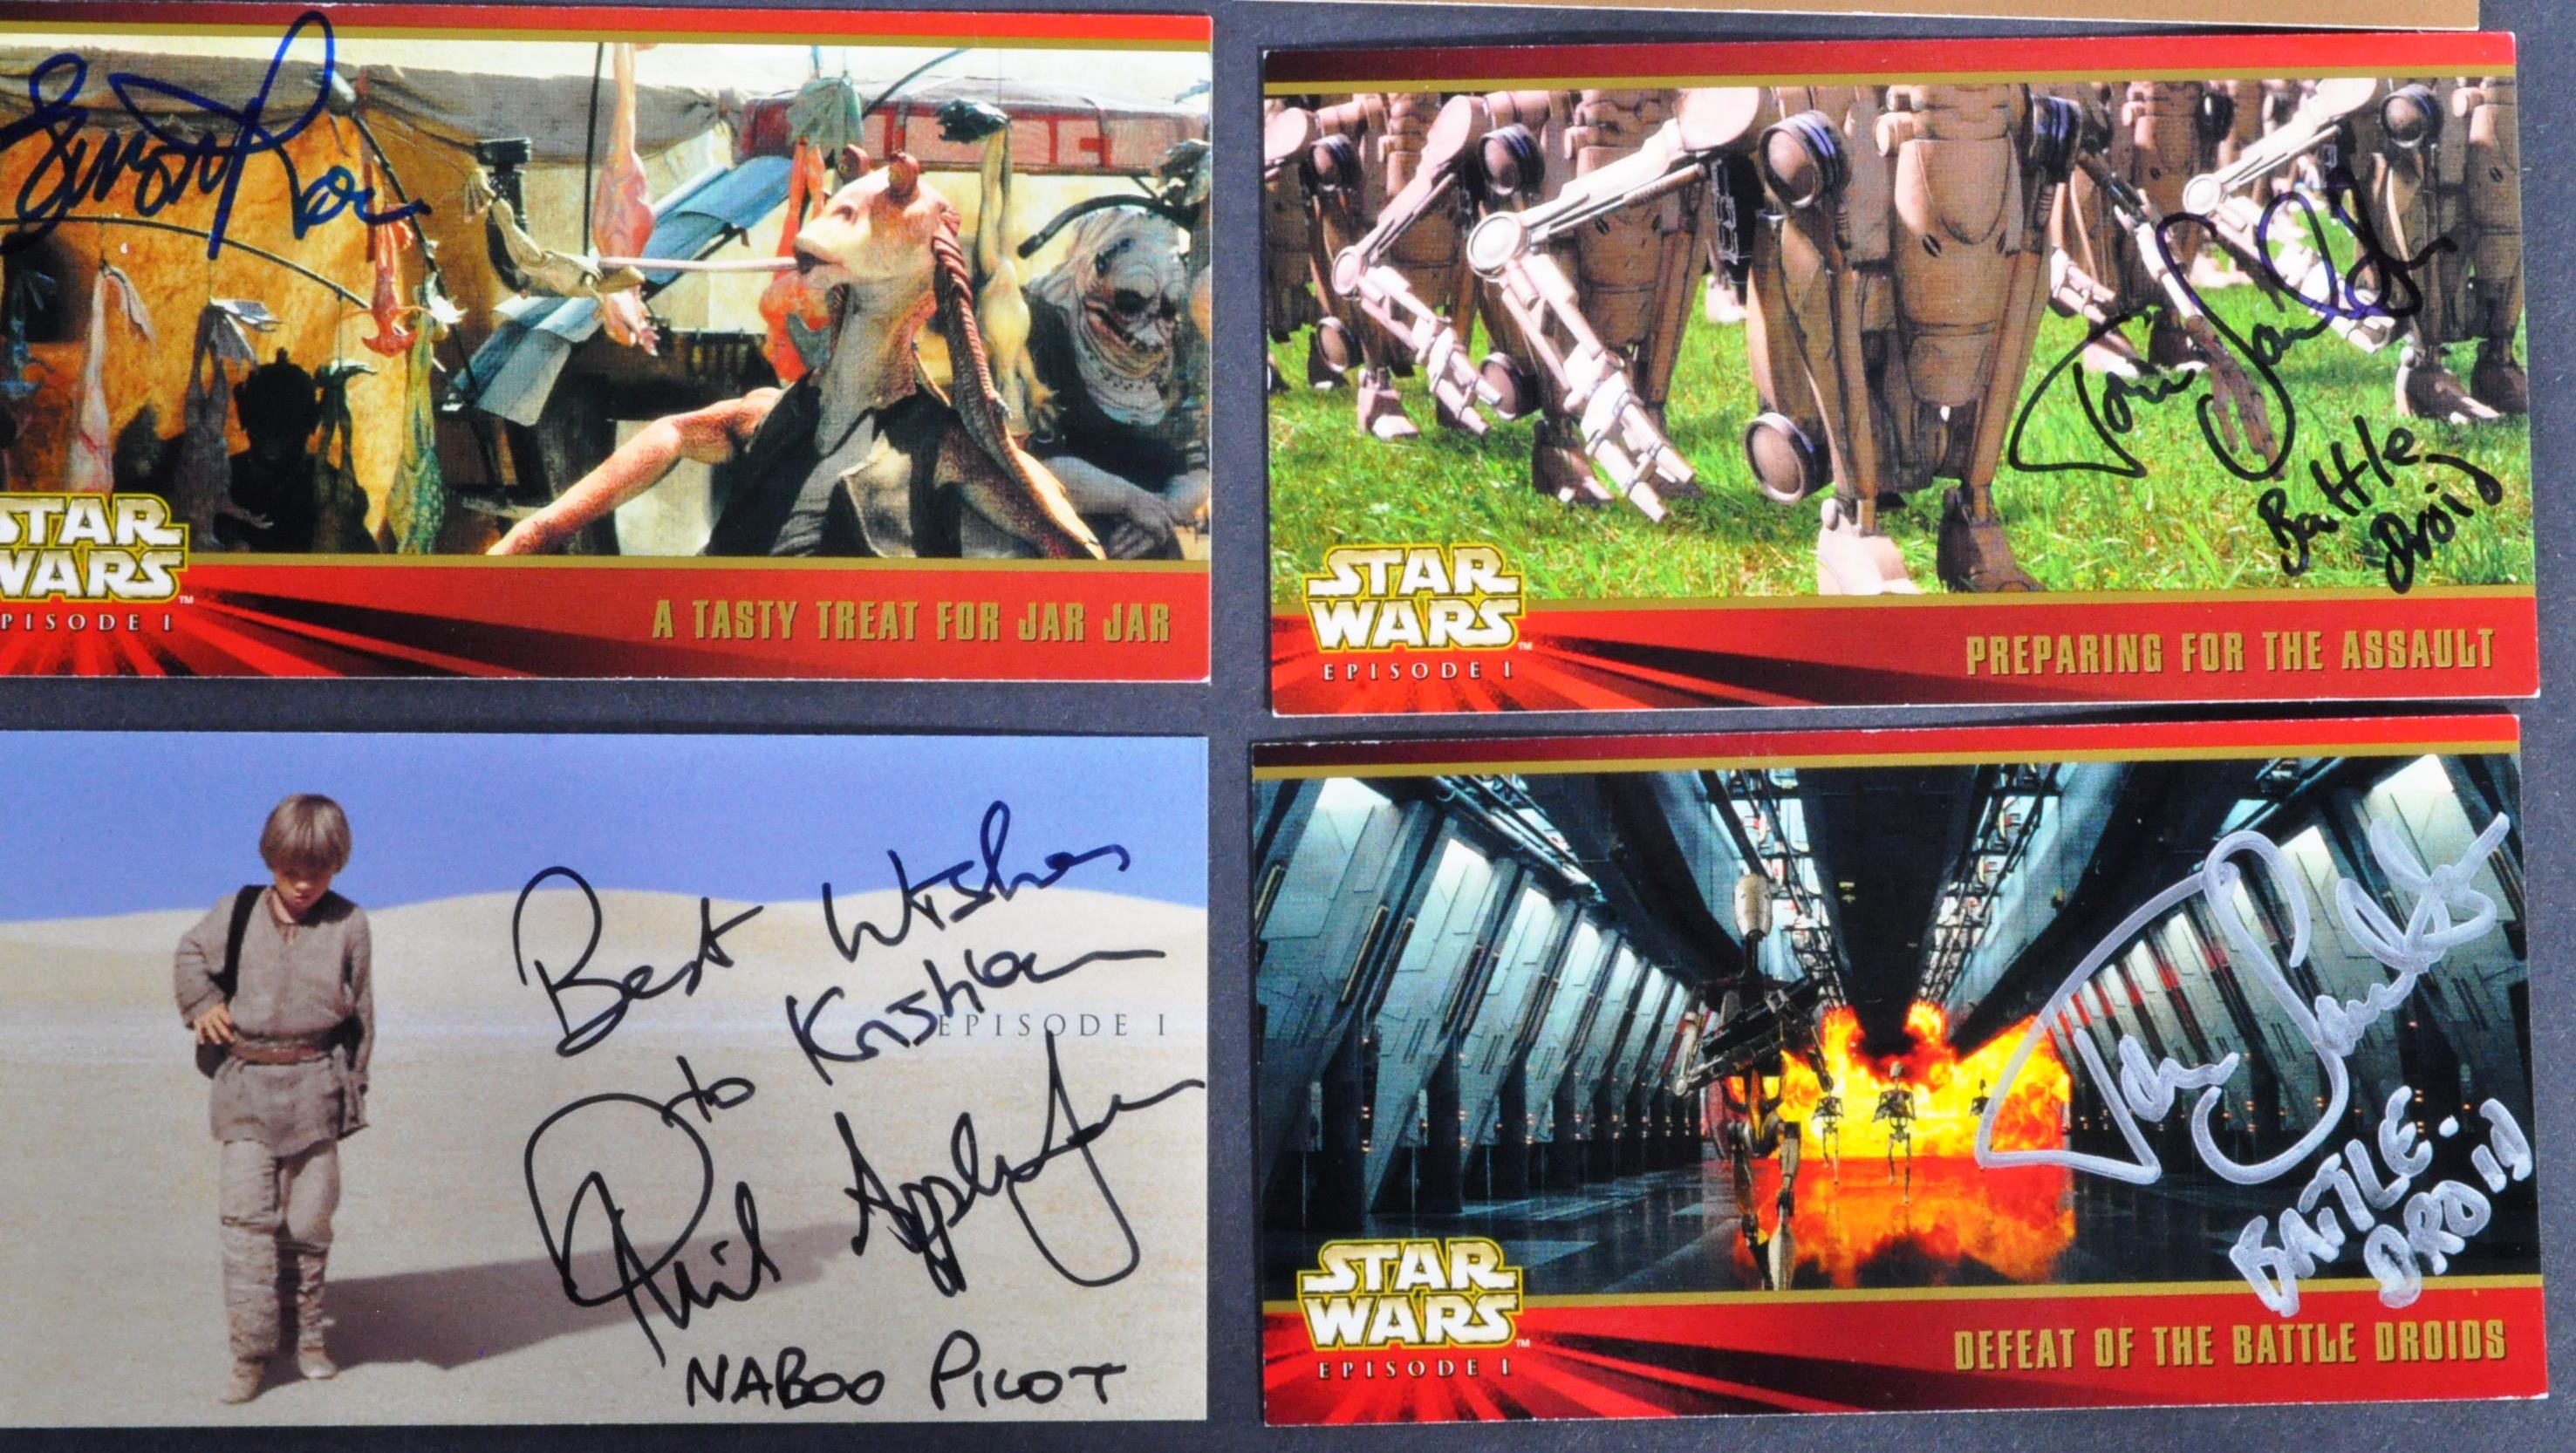 STAR WARS - THE PHANTOM MENACE - COLLECTION OF SIGNED TRADING CARDS - Image 4 of 5